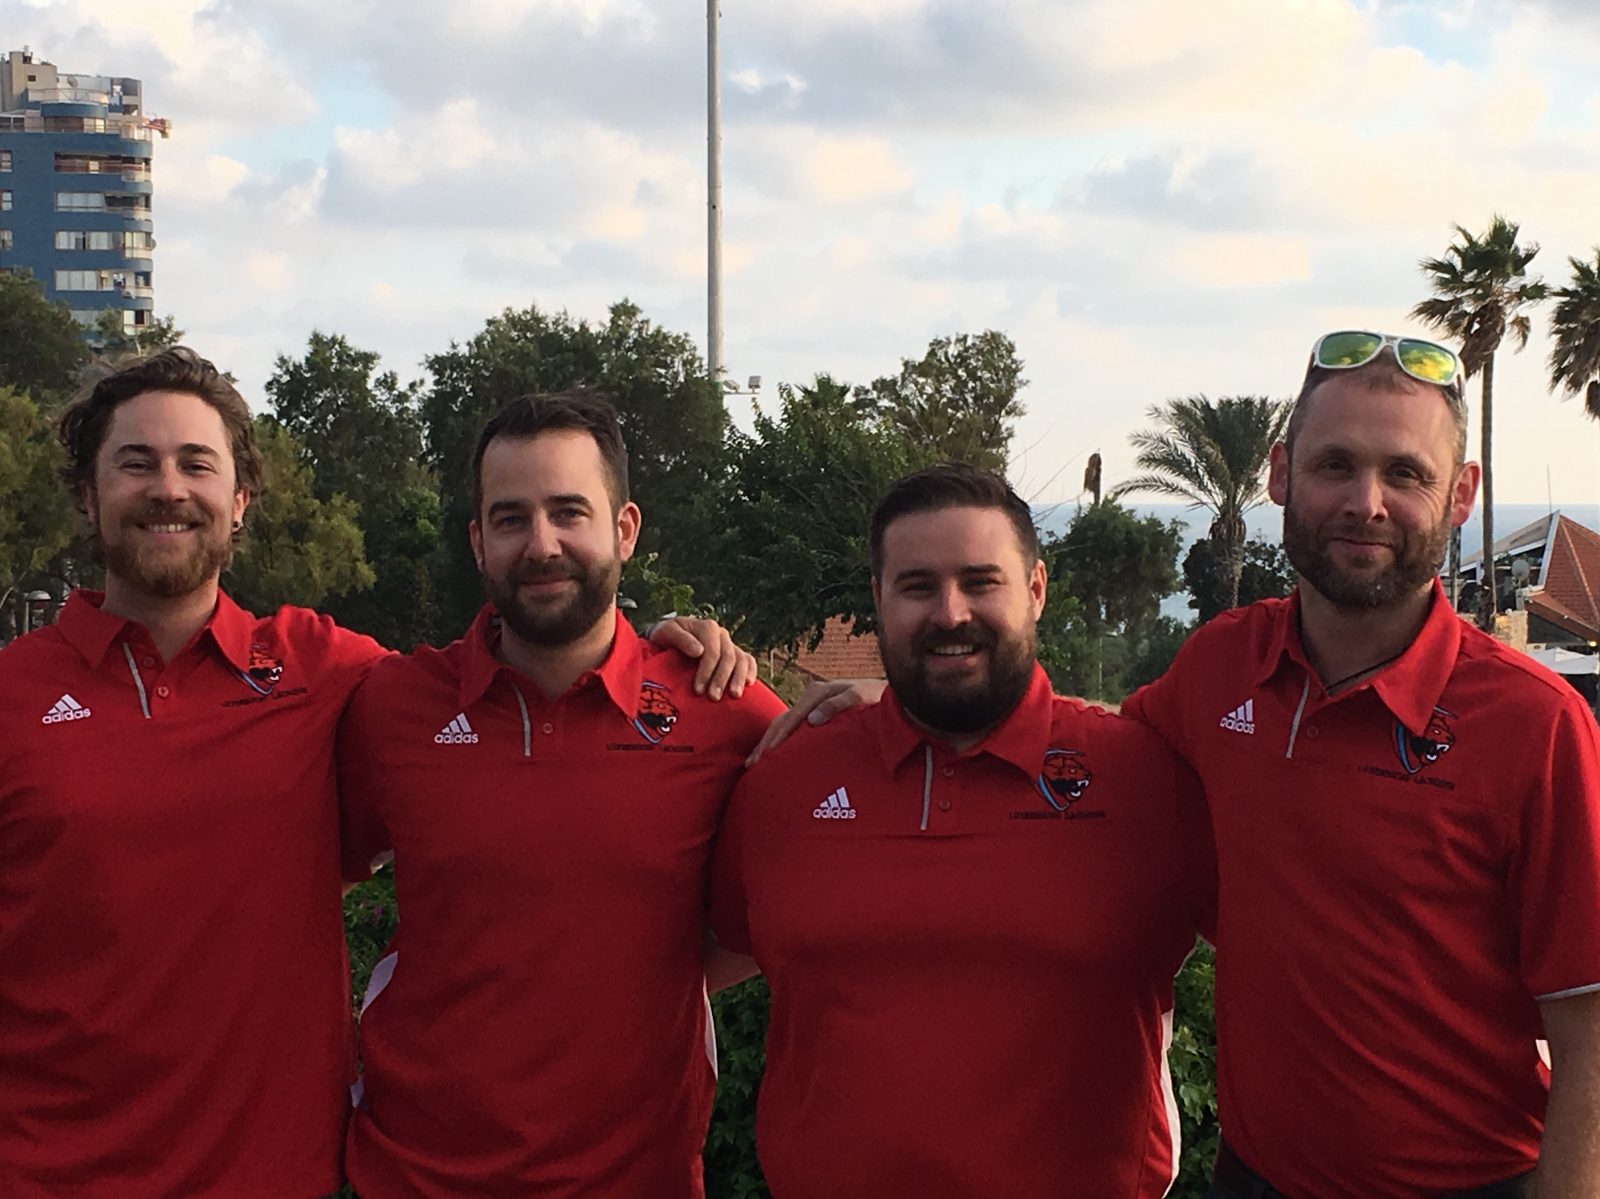 Local lacrosse coach at World Cup with Team Luxembourg